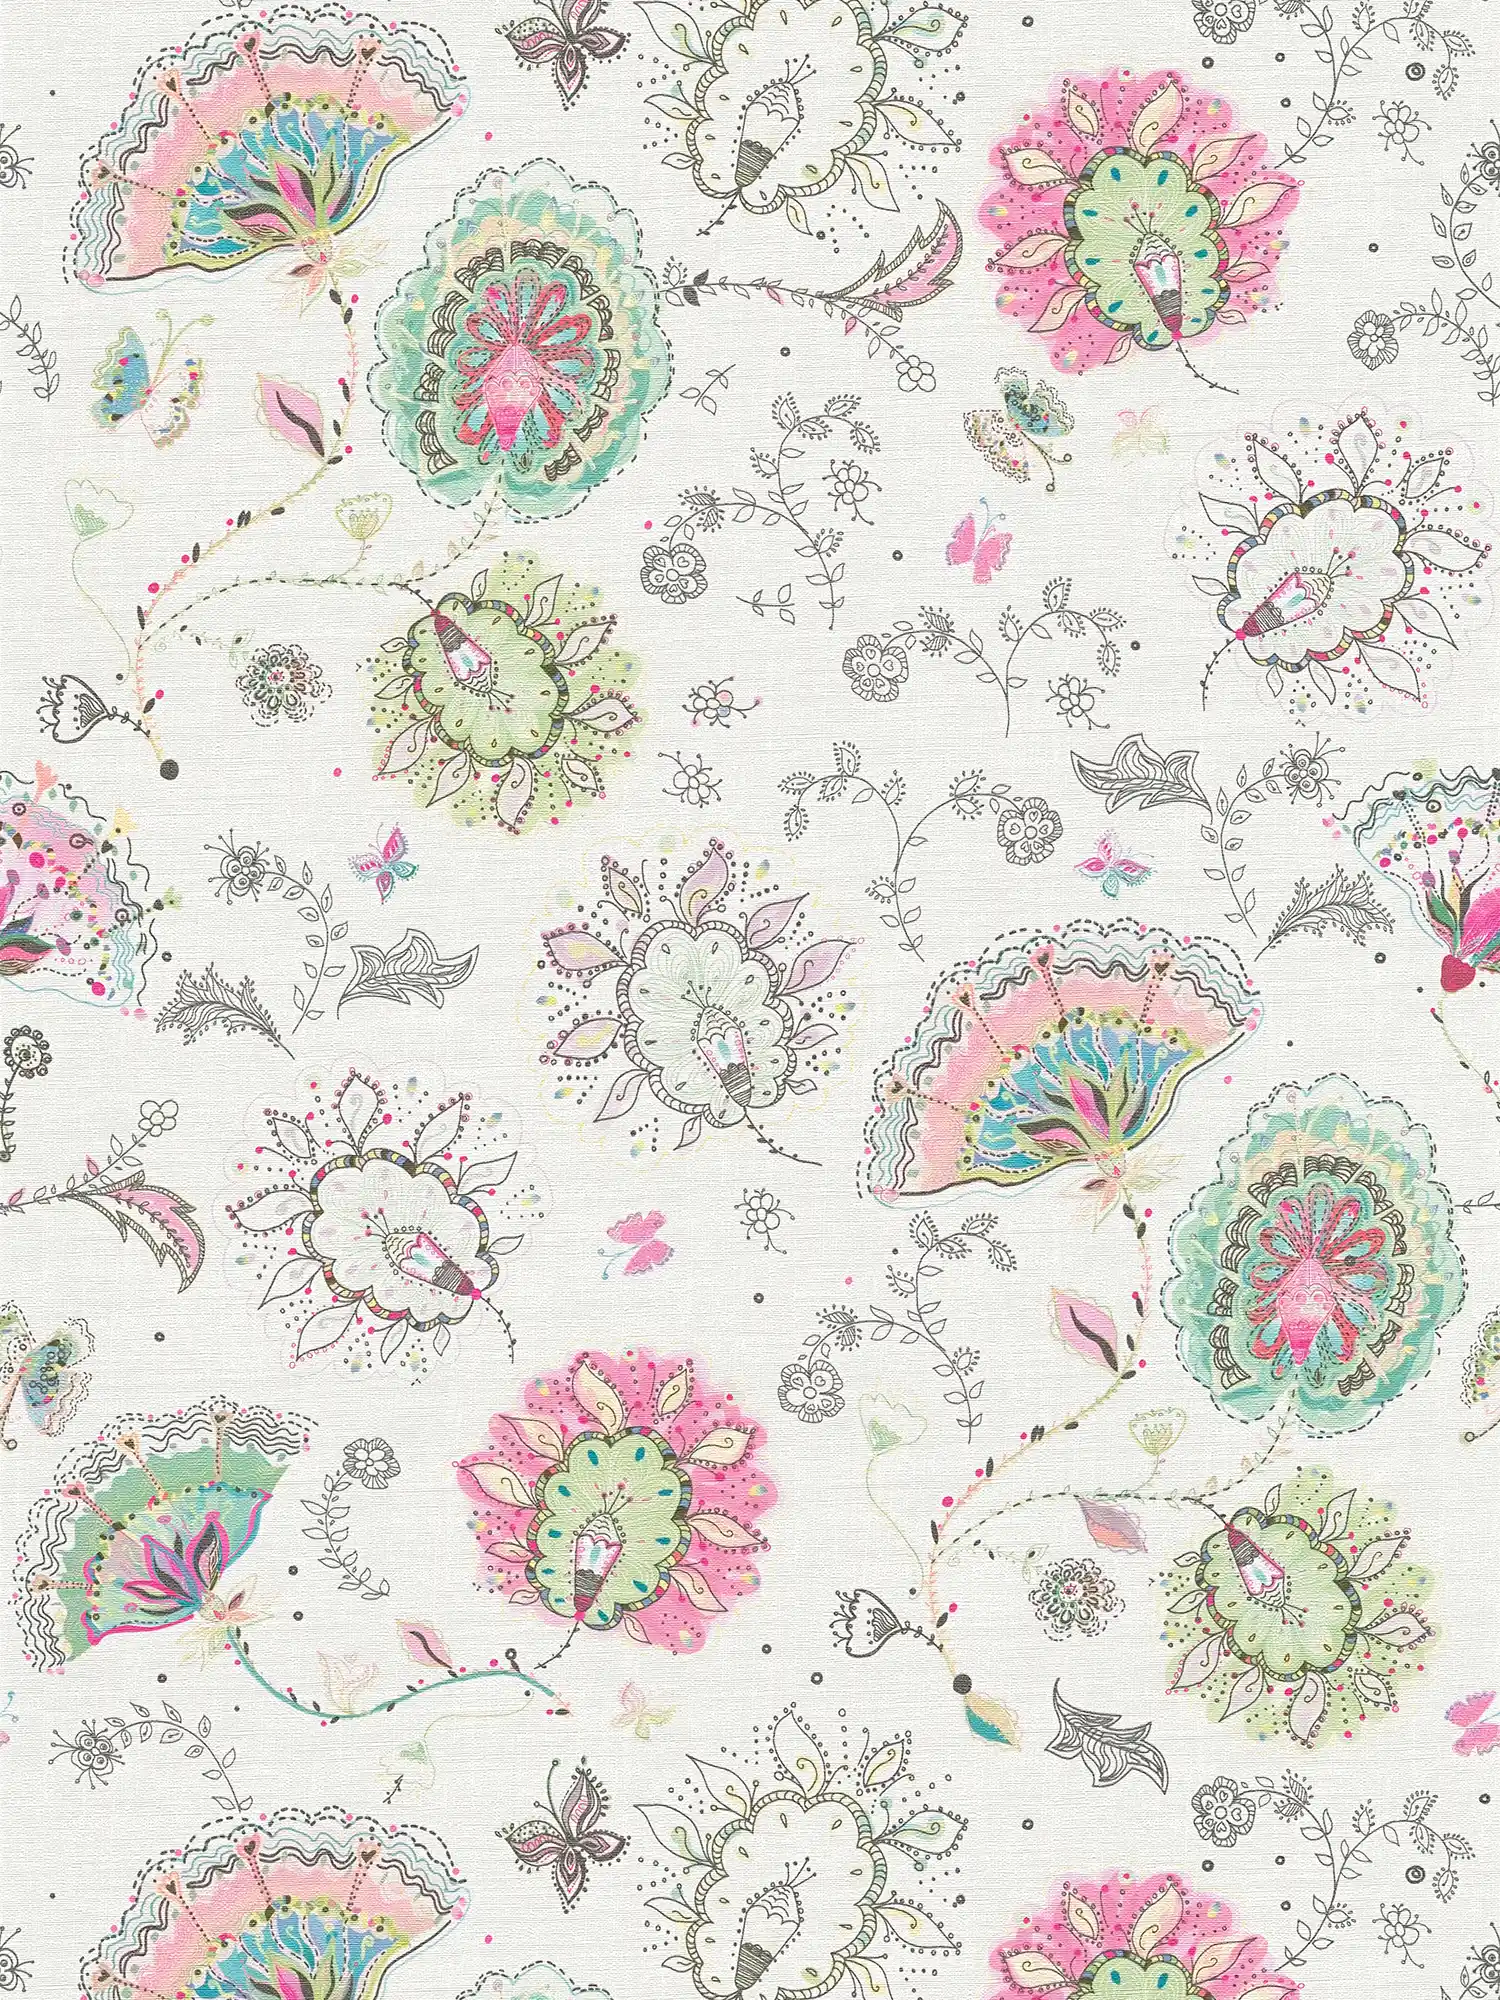 Floral pattern wallpaper in bold colours - cream, green, pink
